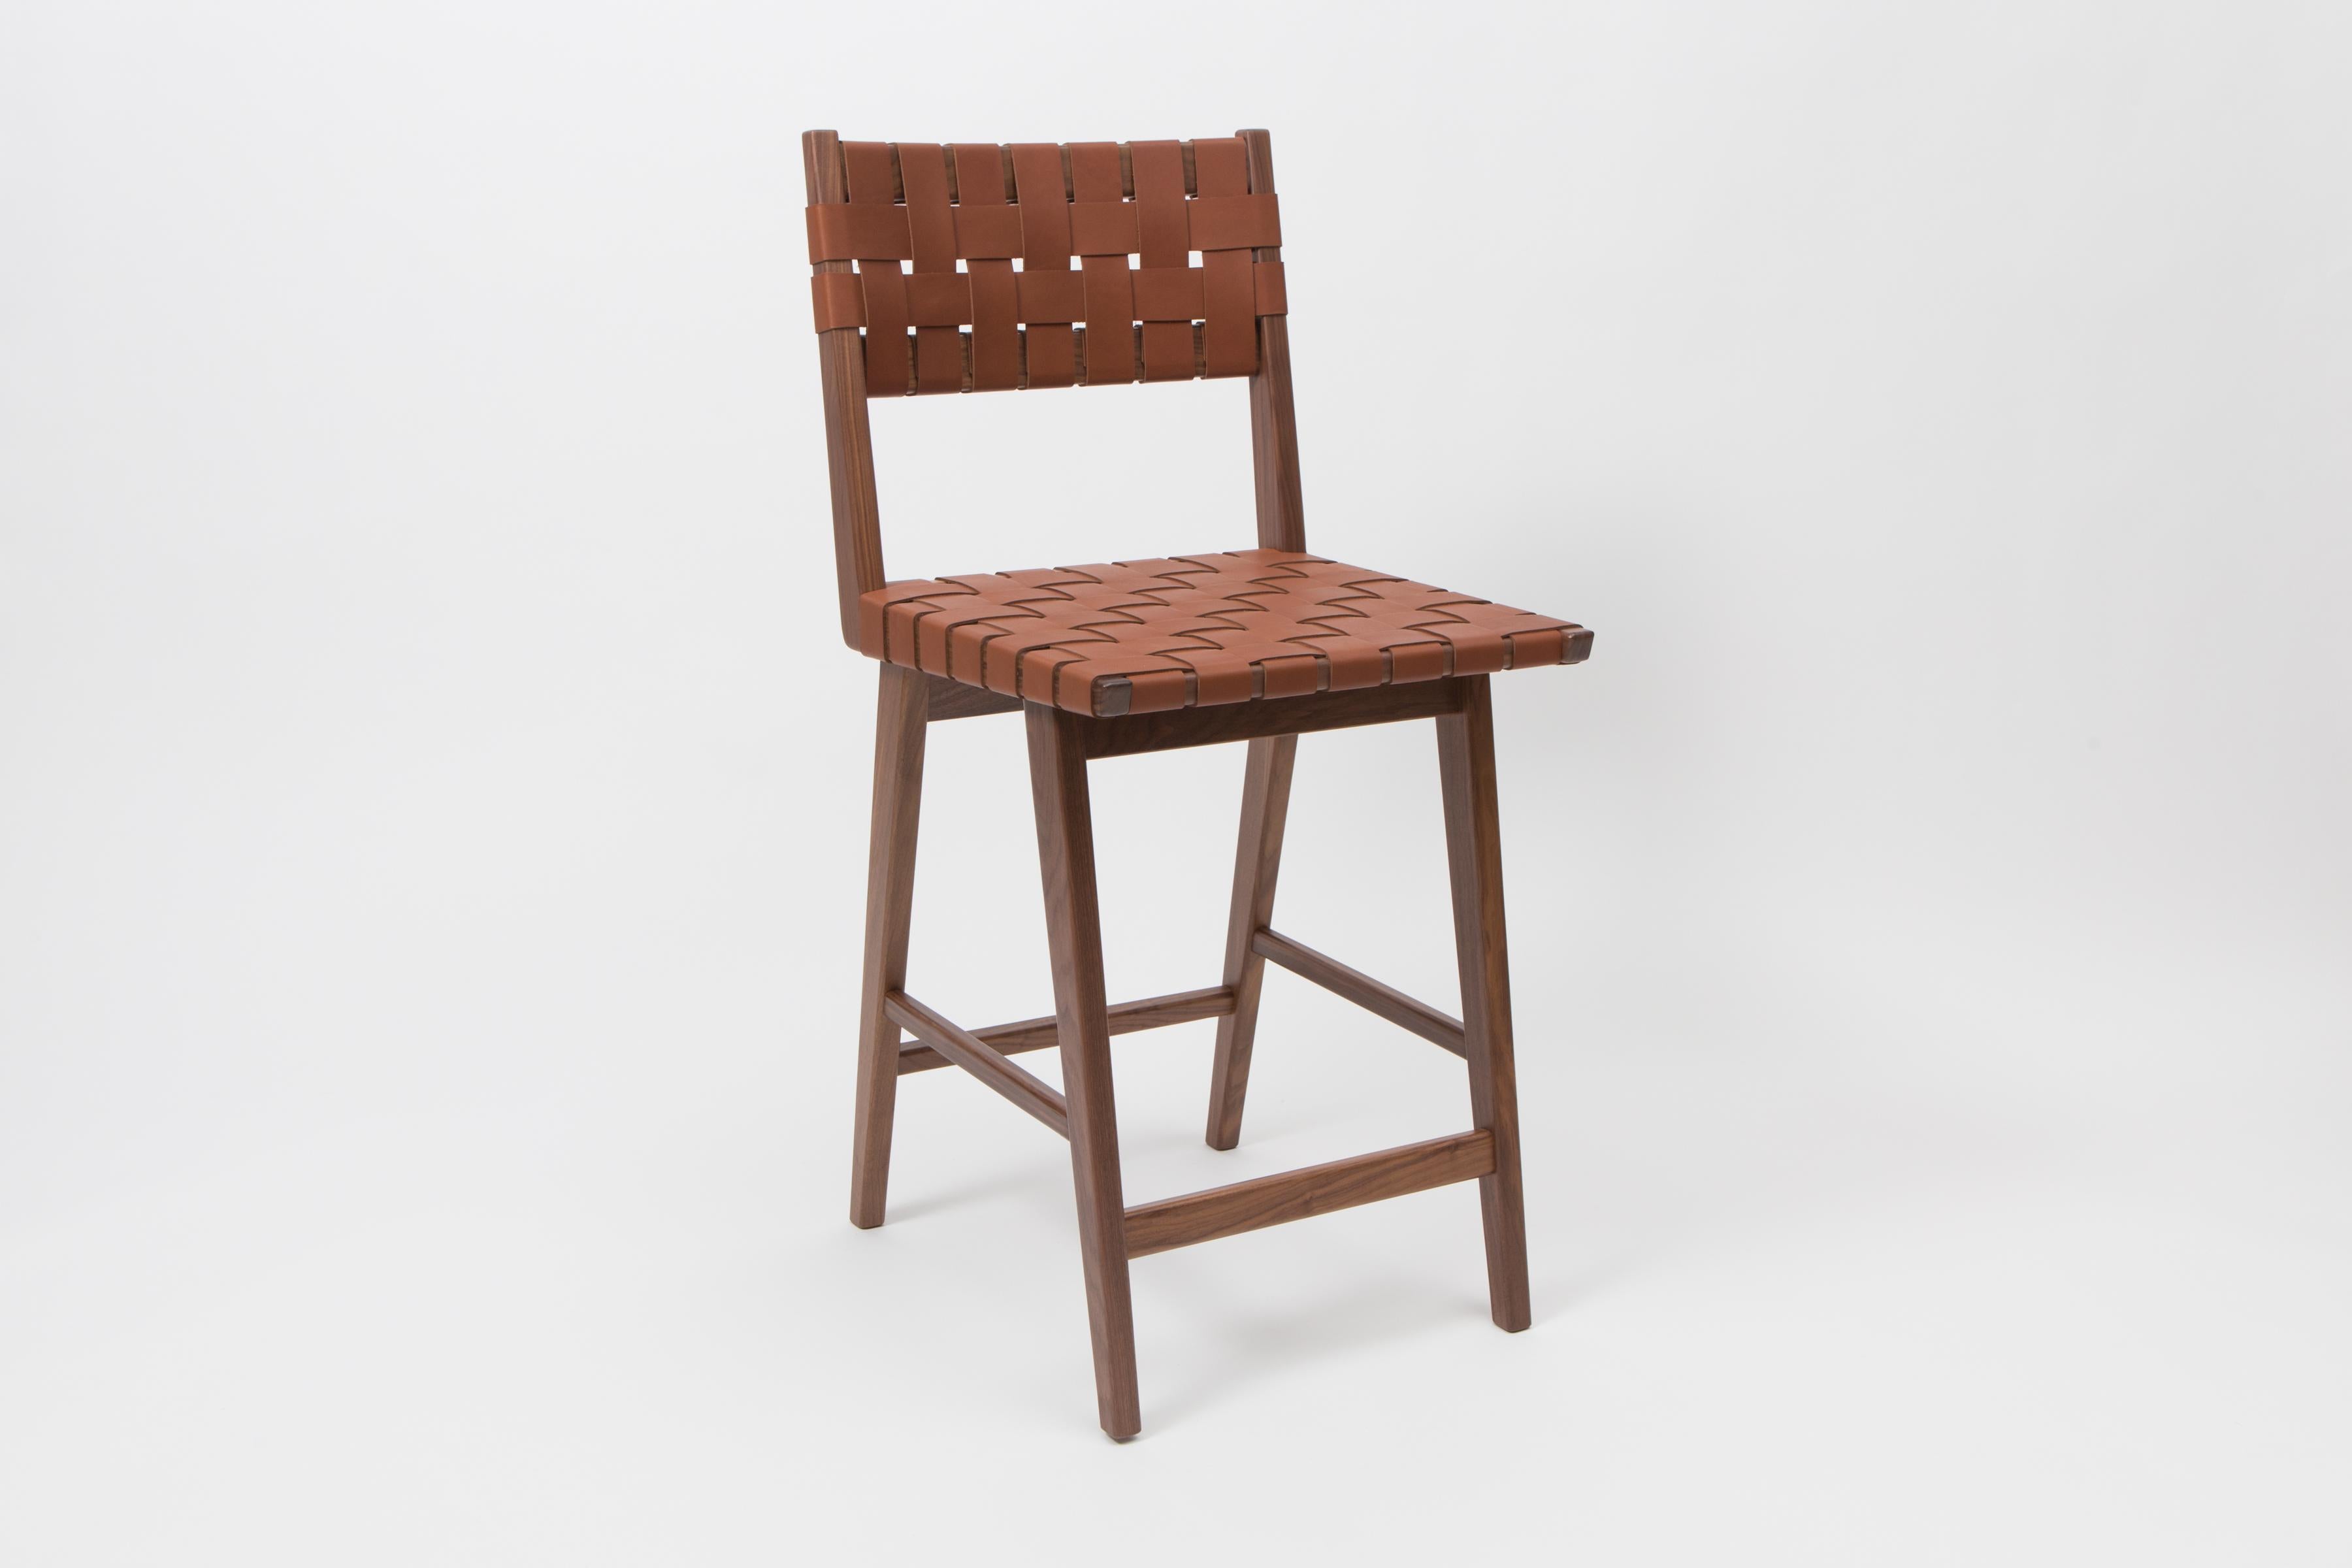 Originally designed by Mel Smilow in 1956 and officially reintroduced by his daughter Judy Smilow in 2016, the Woven Leather Backed Counter stool is classically midcentury. The simplistic beauty, fine craftsmanship, and exceptional detail is present